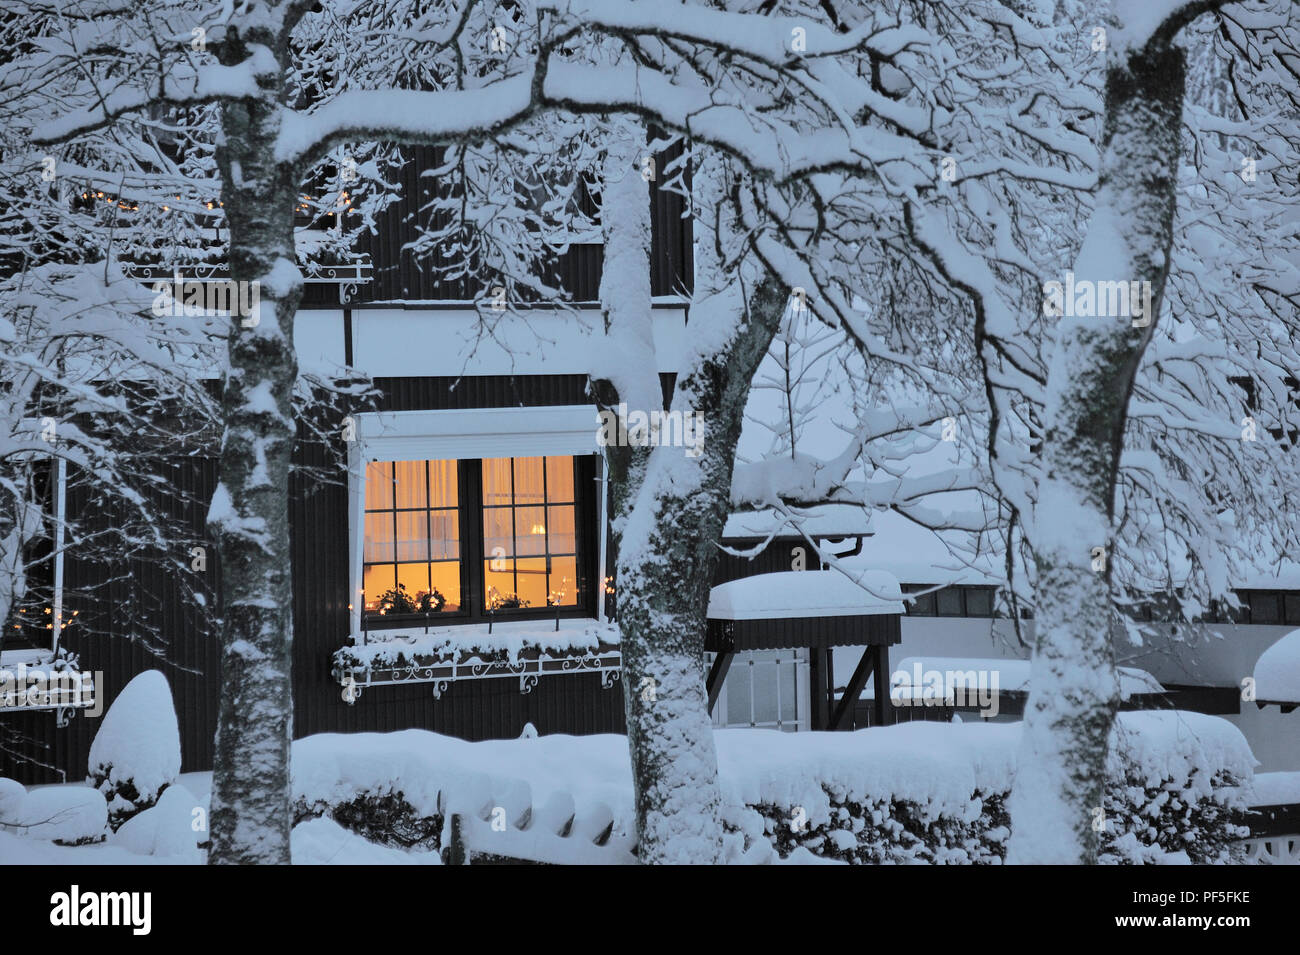 Haus beleuchtet mit Schnee bedeckt | house covered with snow and an illuminated window Stock Photo